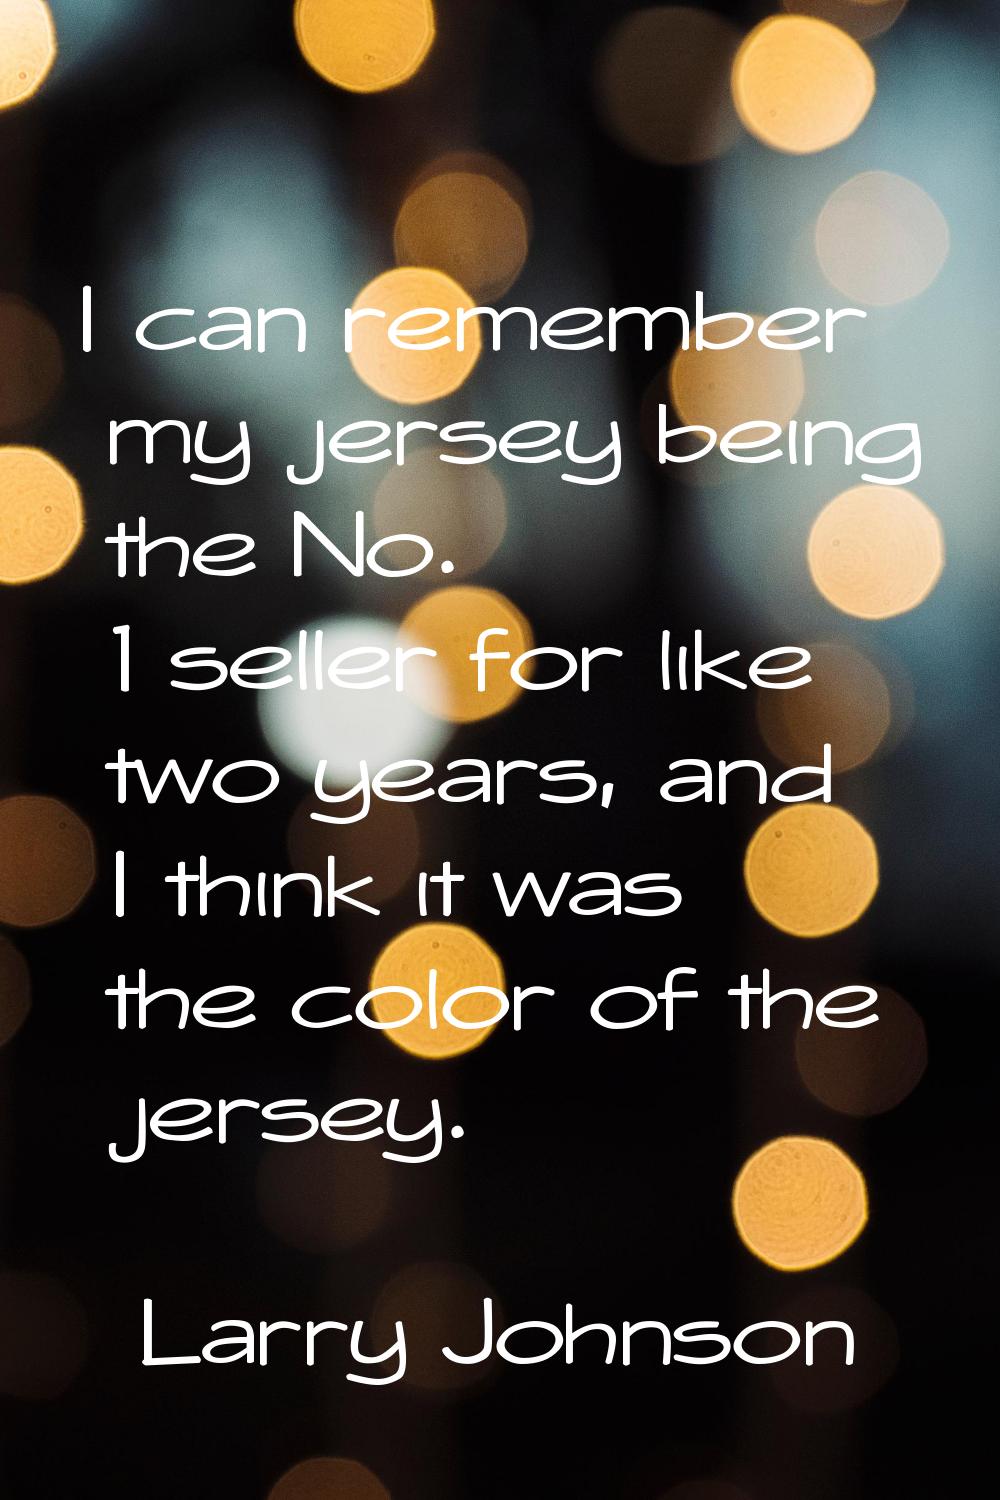 I can remember my jersey being the No. 1 seller for like two years, and I think it was the color of